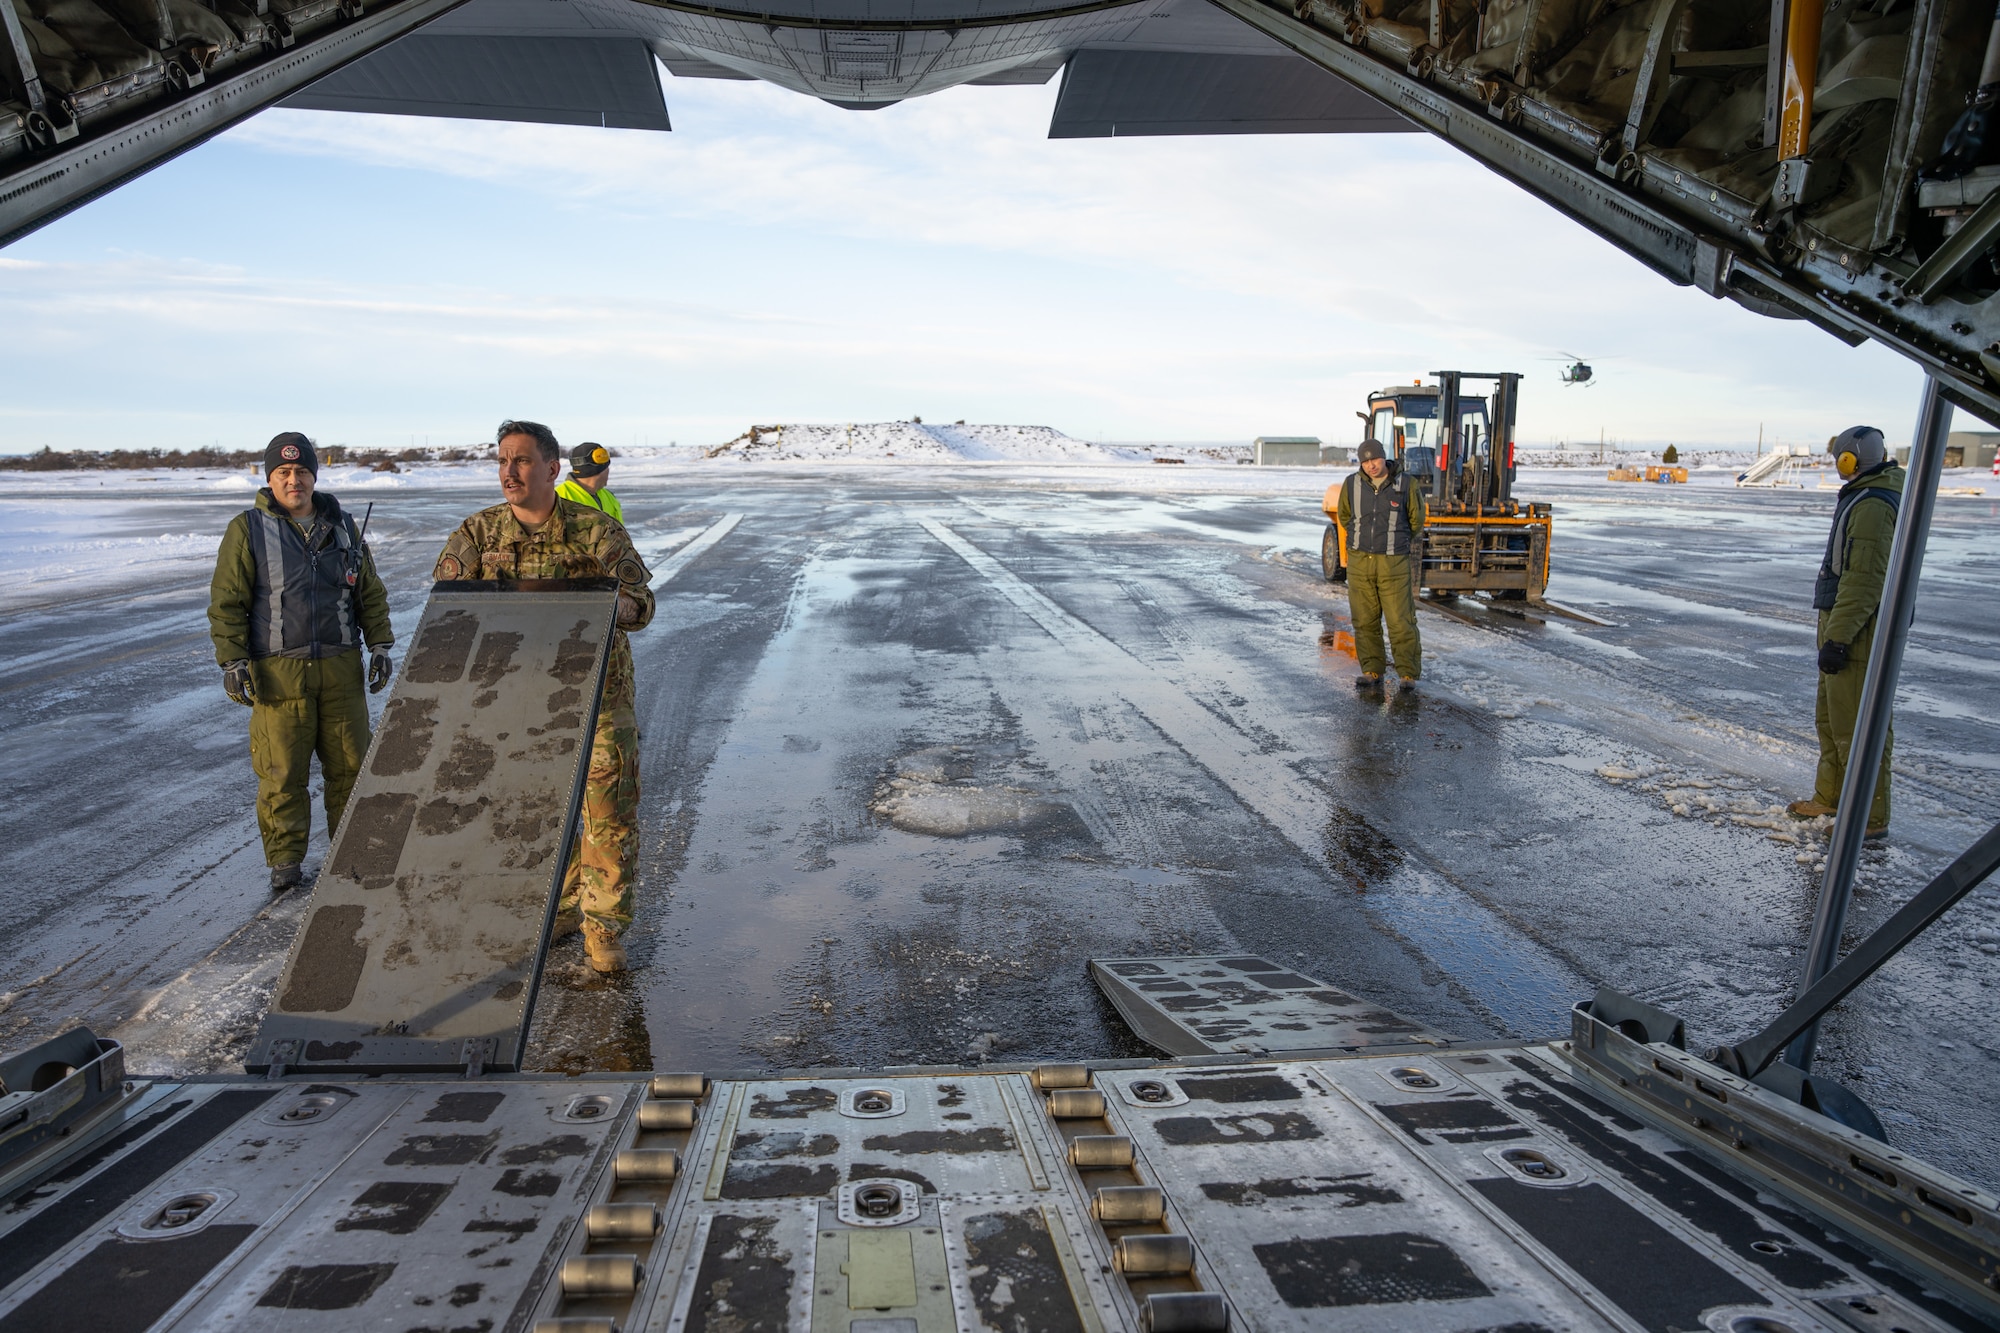 A C-130J Super Hercules loadmaster from the 39th Airlift Squadron out of the 317th Airlift Wing, Dyess AFB, TX prepares to offload a Chilean Army Humvee in Punta Arenas, Chile, July 28, 2023, during exercise Southern Star 23. Exercise Southern Star 23 is a Chilean-led full-scale Special Operations, Joint, and Combined Employment Exercise. The training consists of staff planning, tactical maneuvers, and collaboration among SOUTHCOM components’ staff, Chilean Armed Forces, and interagency partners during a stabilization scenario which facilitates the opportunity for participants to execute and assess the staff’s ability to plan, coordinate and execute command and control, logistical support, and decision-making processes in a crisis scenario. (U.S. Air Force photo by Staff Sgt. Clayton Wear)